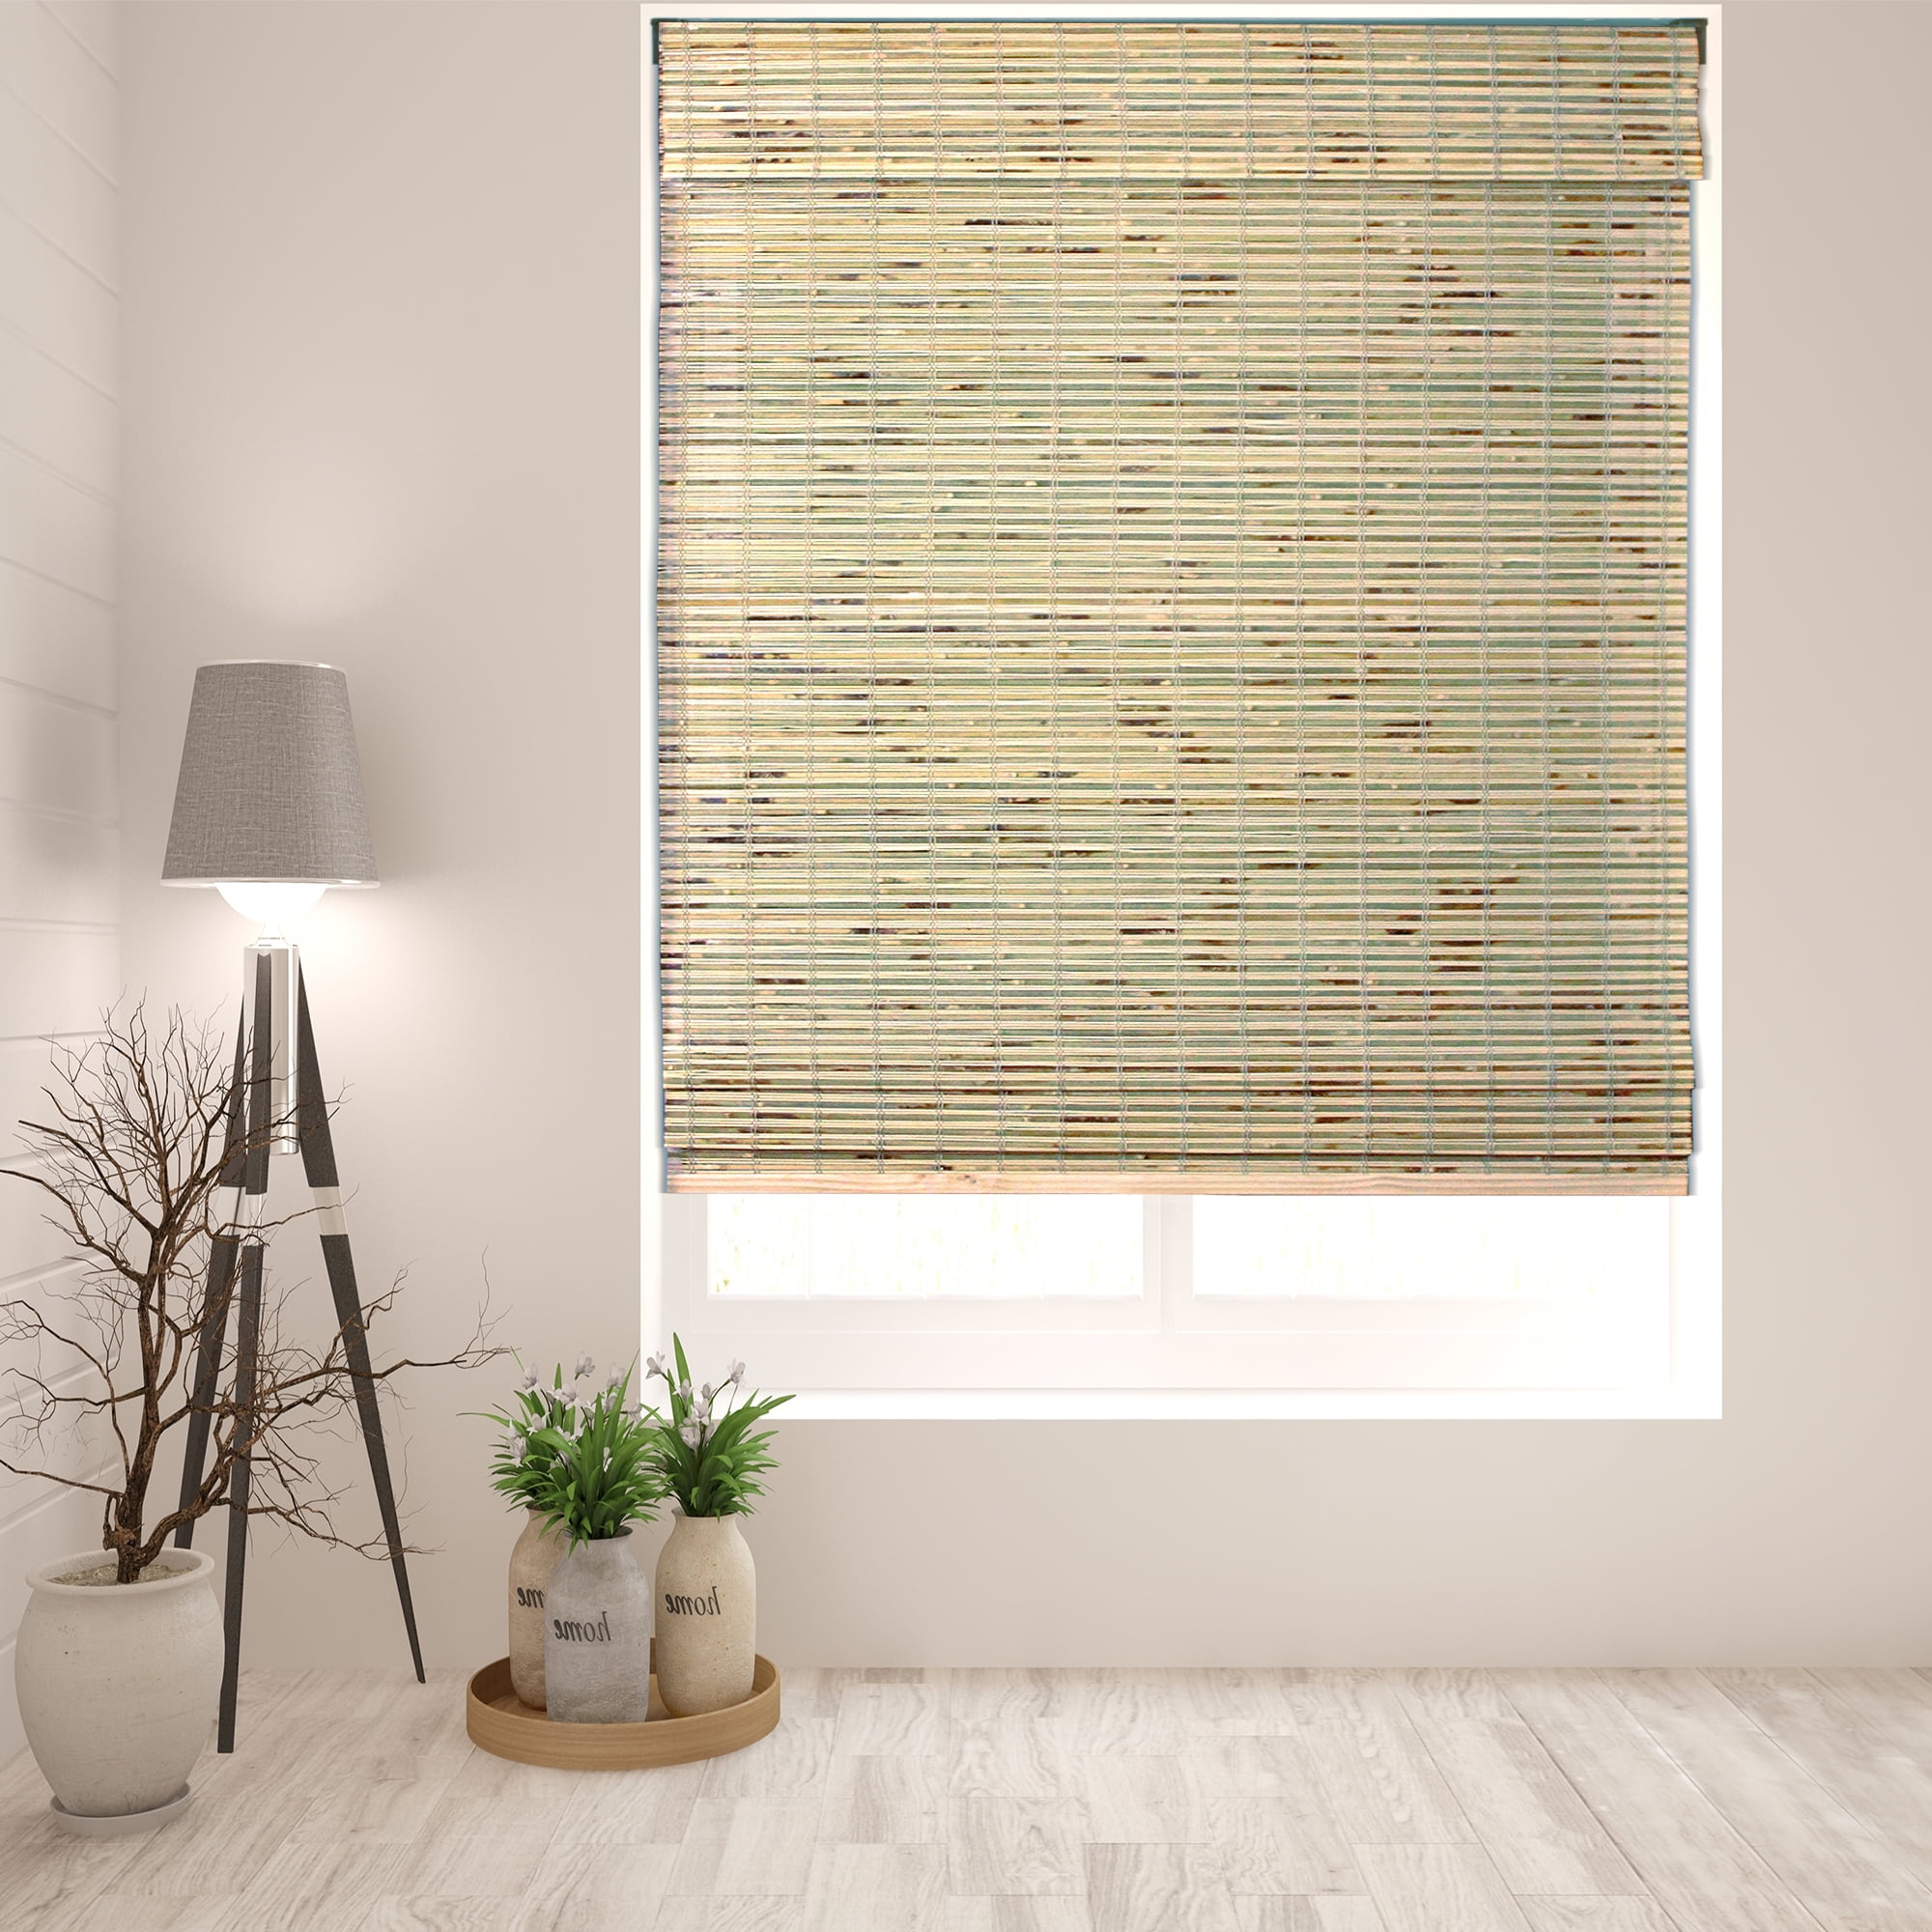 Driftwood Gray Details about   NEW Radiance Cordless Semi Private Bamboo Roman Shade 